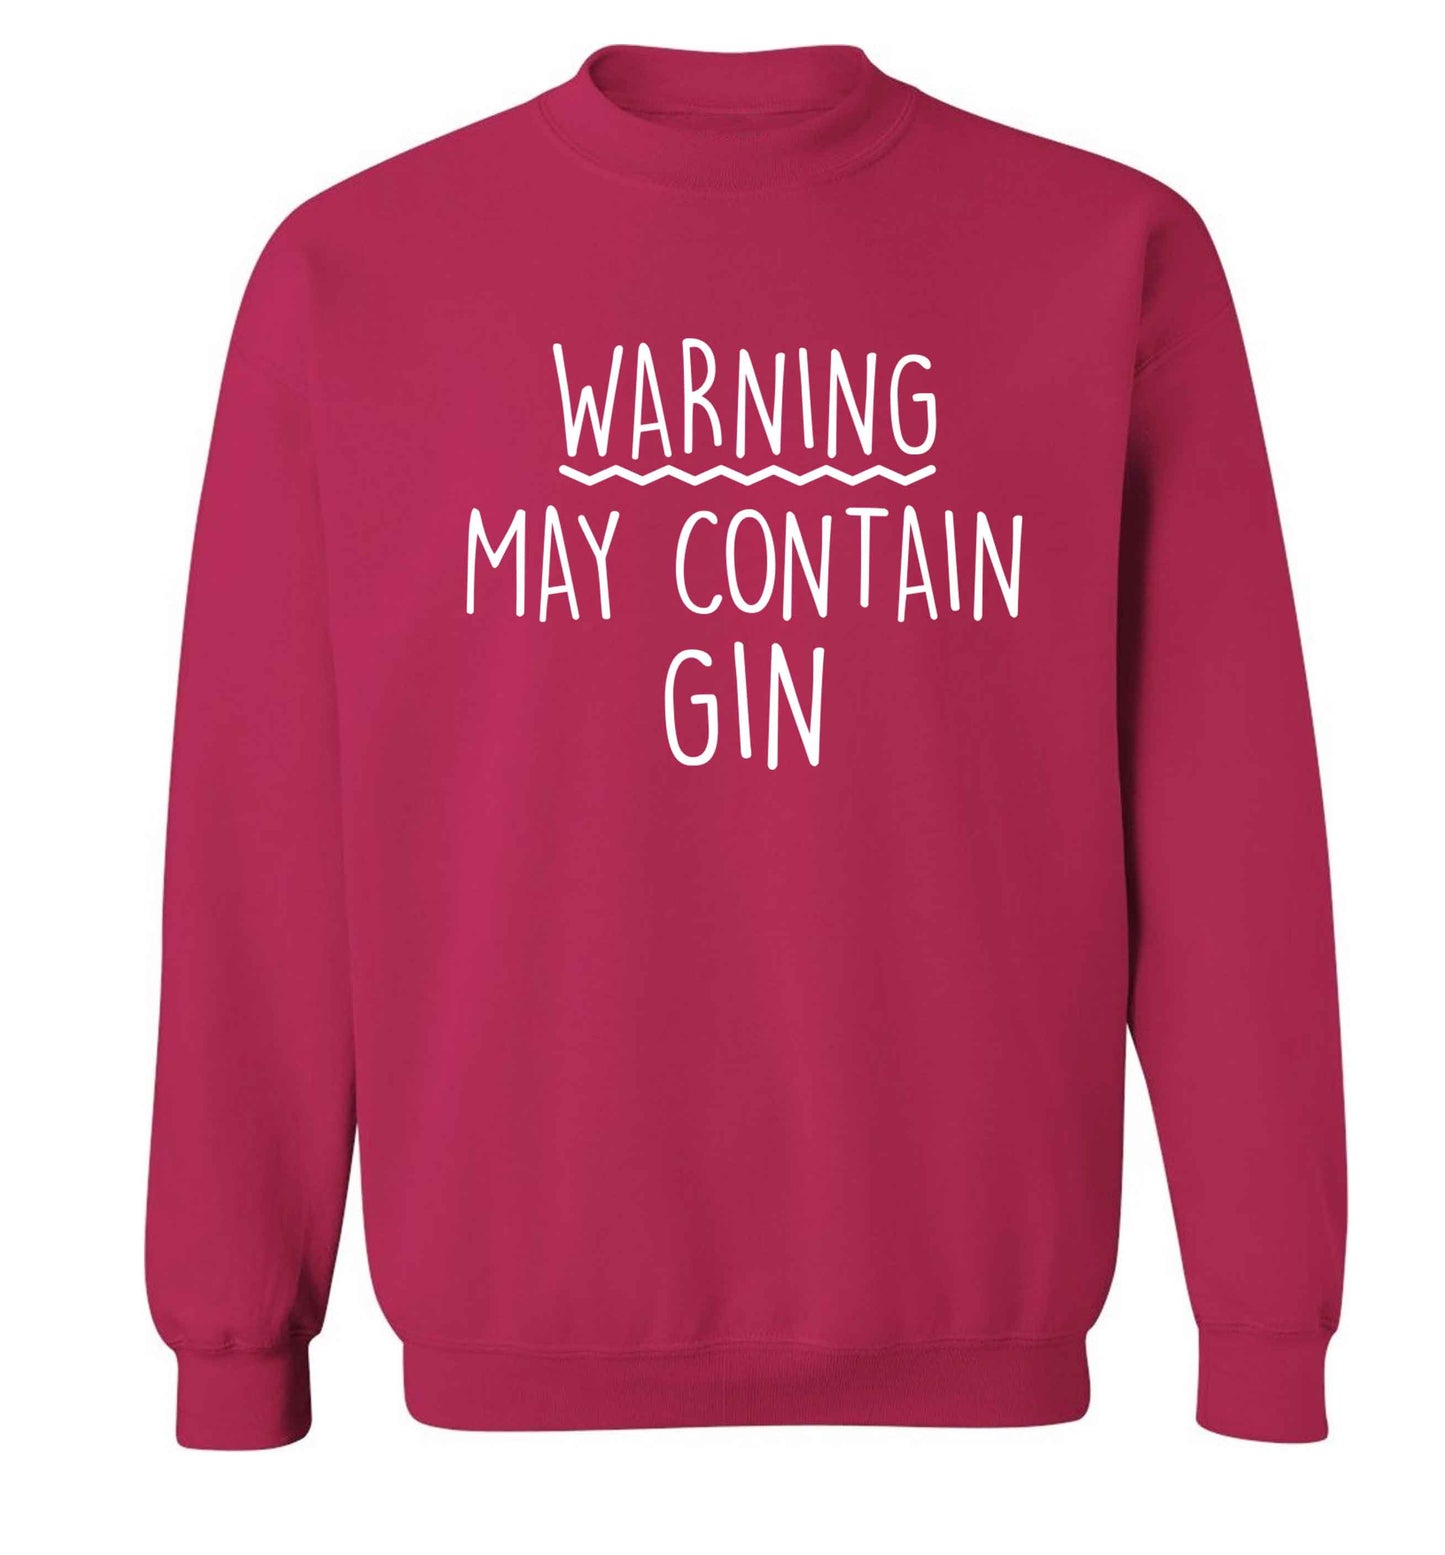 Warning may contain gin Adult's unisex pink Sweater 2XL